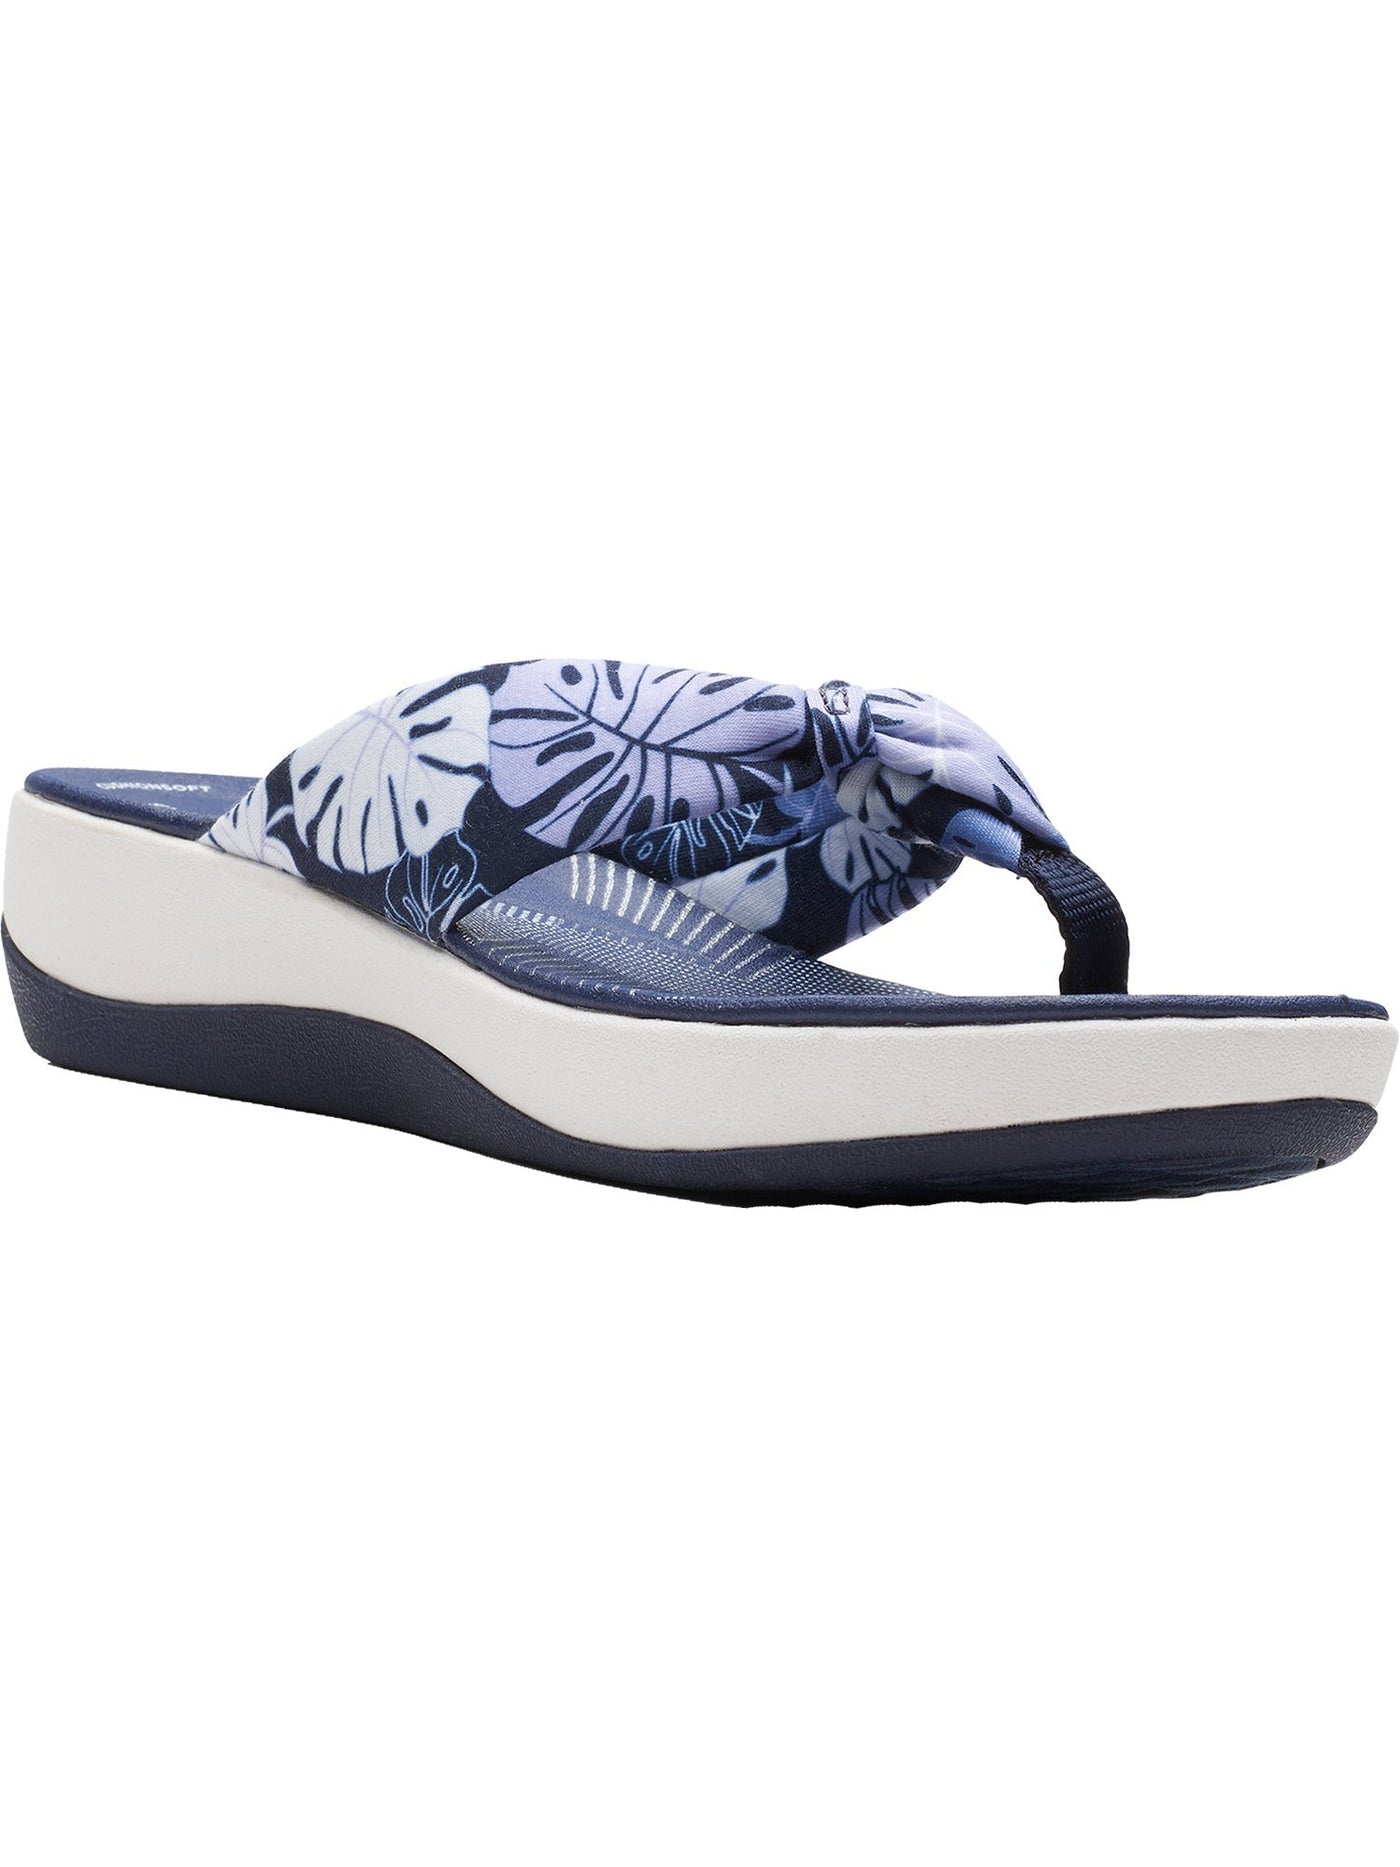 CLOUD STEPPERS BY CLARKS Womens Navy Printed 1" Platform Cushioned Arla Glison Round Toe Wedge Slip On Thong Sandals Shoes 10 M